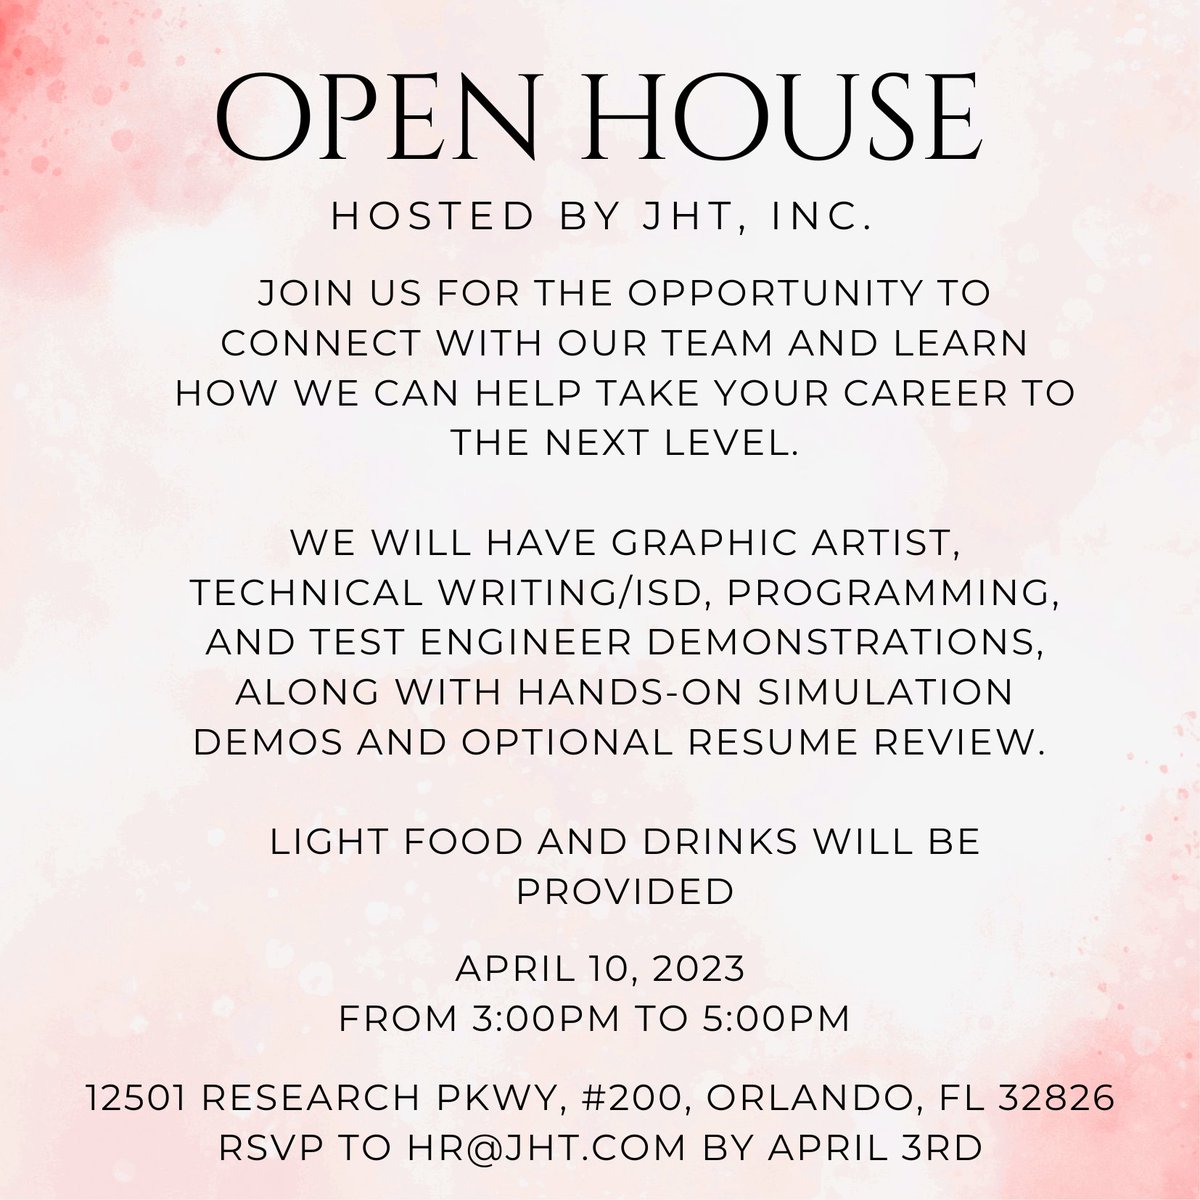 Want to learn what it's like working for JHT? Join us at our Open House to connect with our team, learn how to take your career to the next level, and enjoy free food and beverages.

#career #openhouse #connect #orlando #orlandobusiness  #opportunity #learning  #resumereview #jht